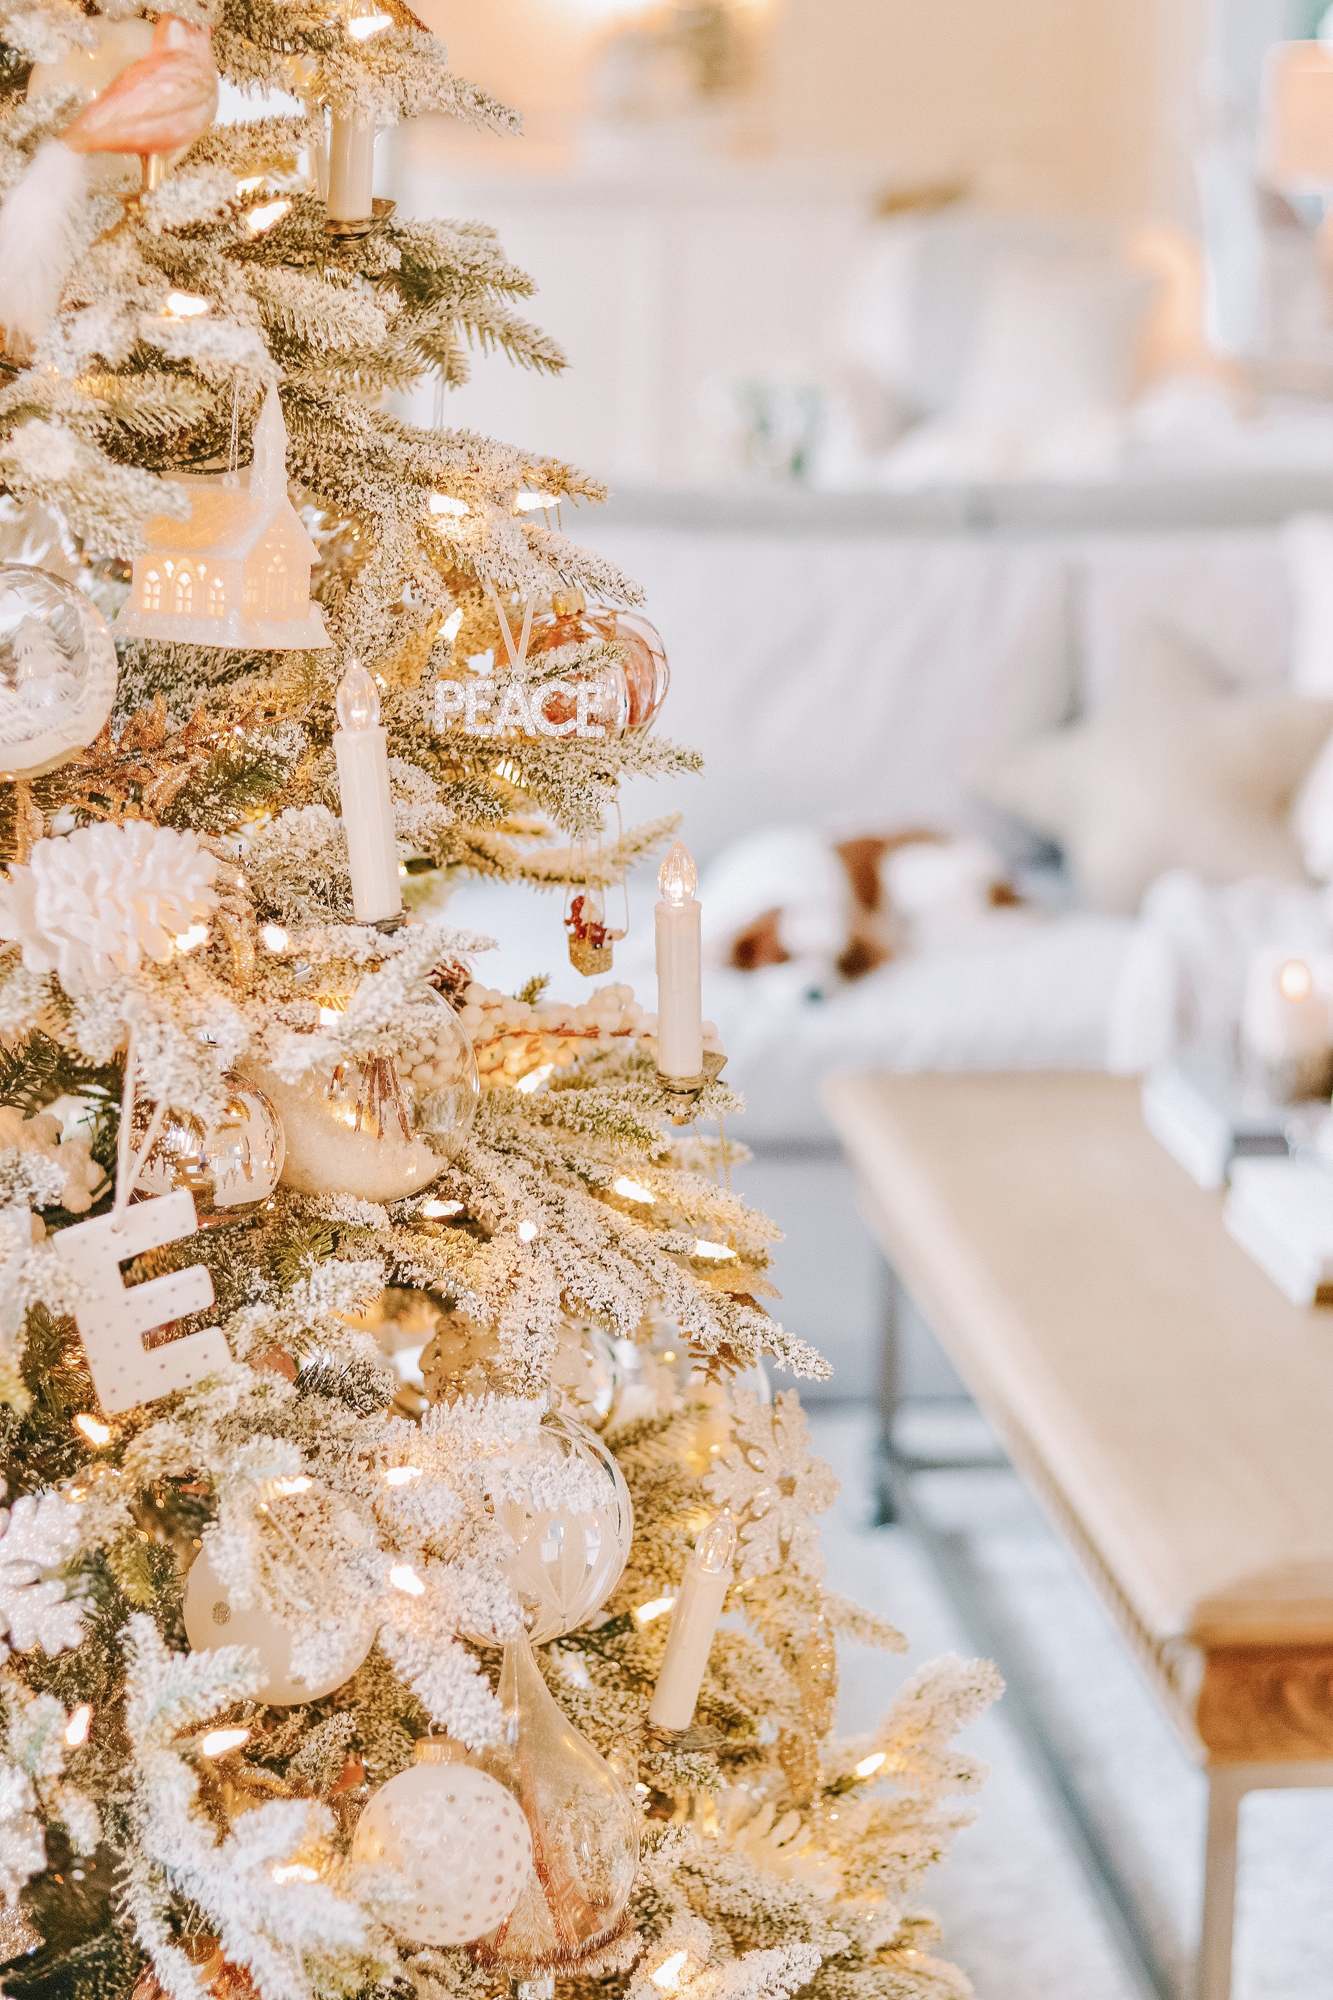 Holiday Decor Links & Sources - You all loved my Christmas decor from last year.. all of the hottest items are back in stock! Many on sale. Linked all.